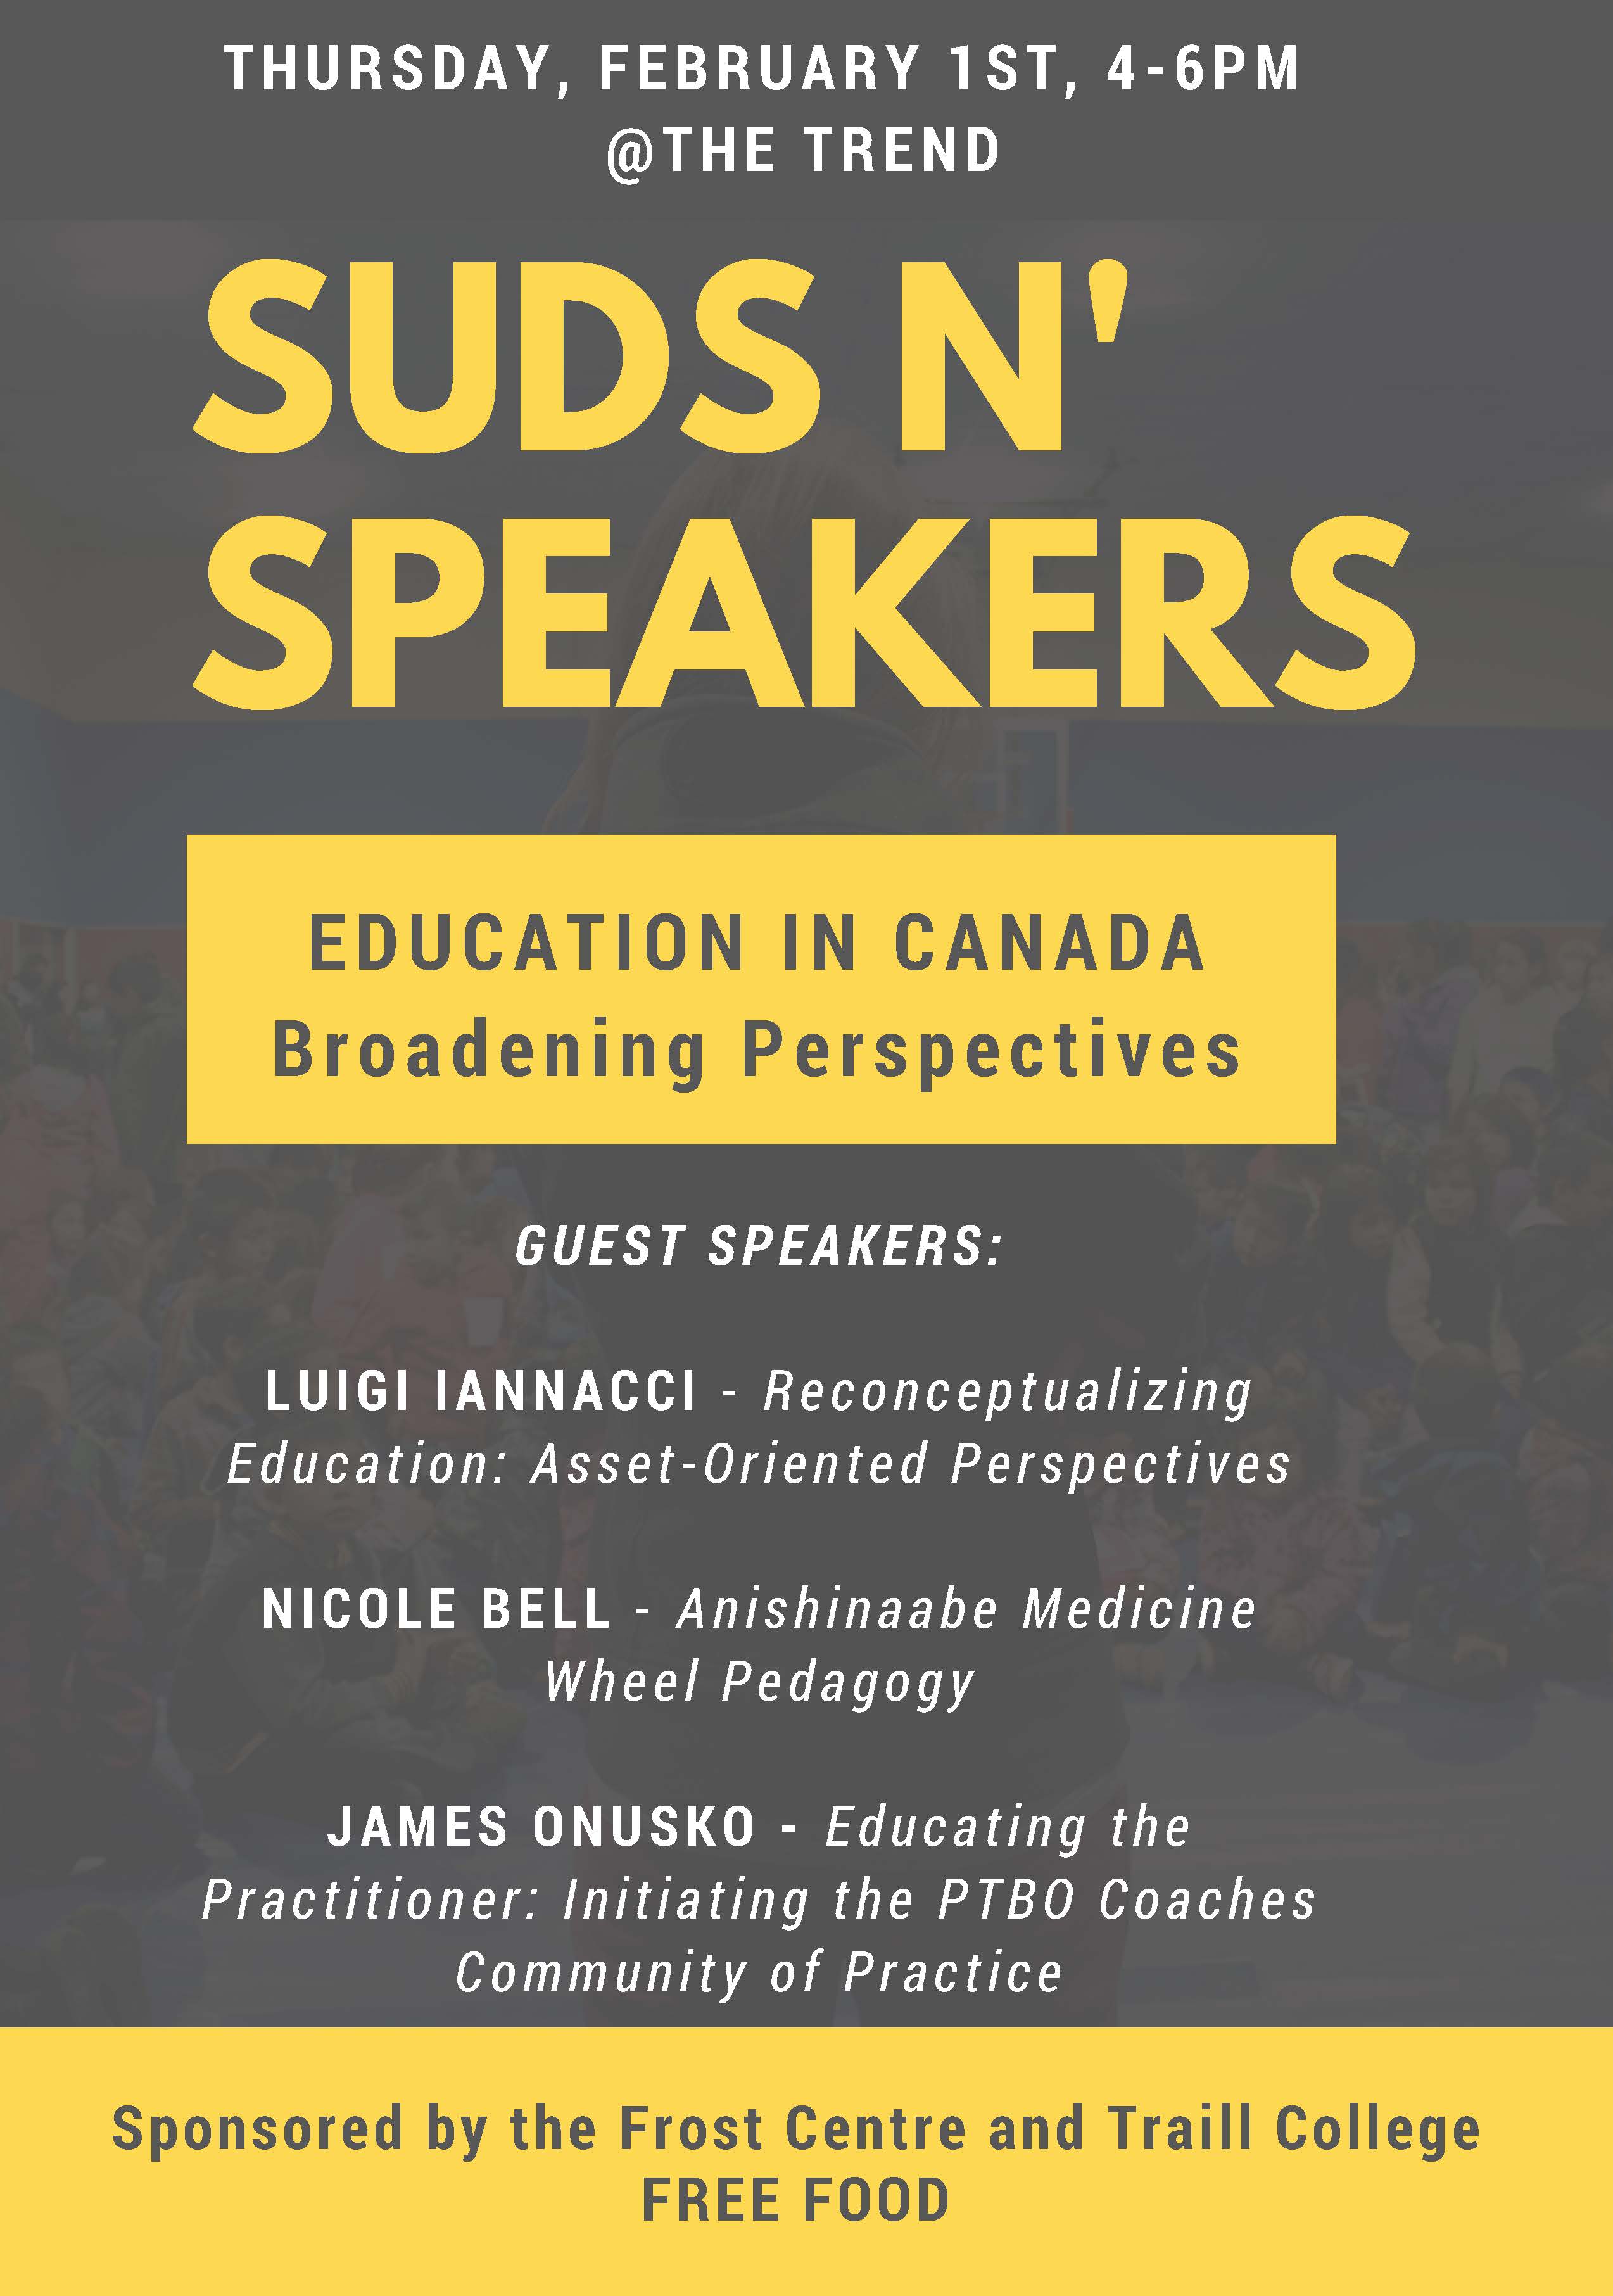 "Education in Canada: Broadening Perspectives" Suds n' Speakers event 1 February 2018